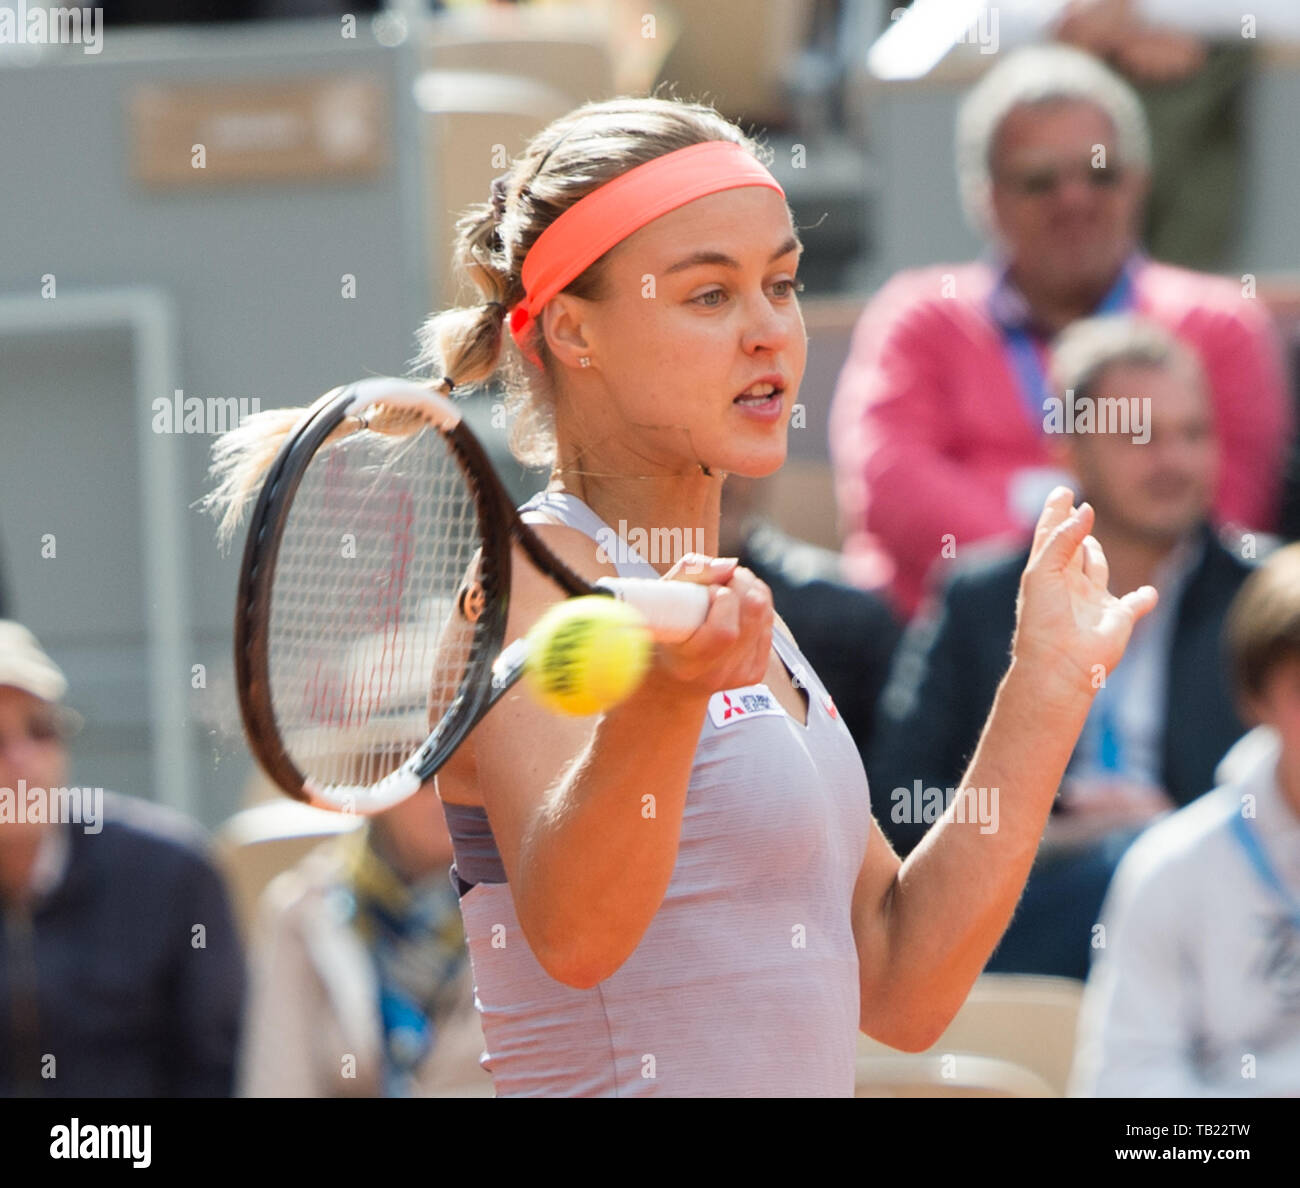 Paris, France. 28th May, 2019. Anna Karolina Schmiedlova (SVK) is defeated by Naomi Osaka (JPN) 6-0, 6-7(4), 1-6, at the French Open being played at Stade Roland-Garros in Paris, France. © Karla Kinne/Tennisclix 2019/CSM/Alamy Live News Stock Photo